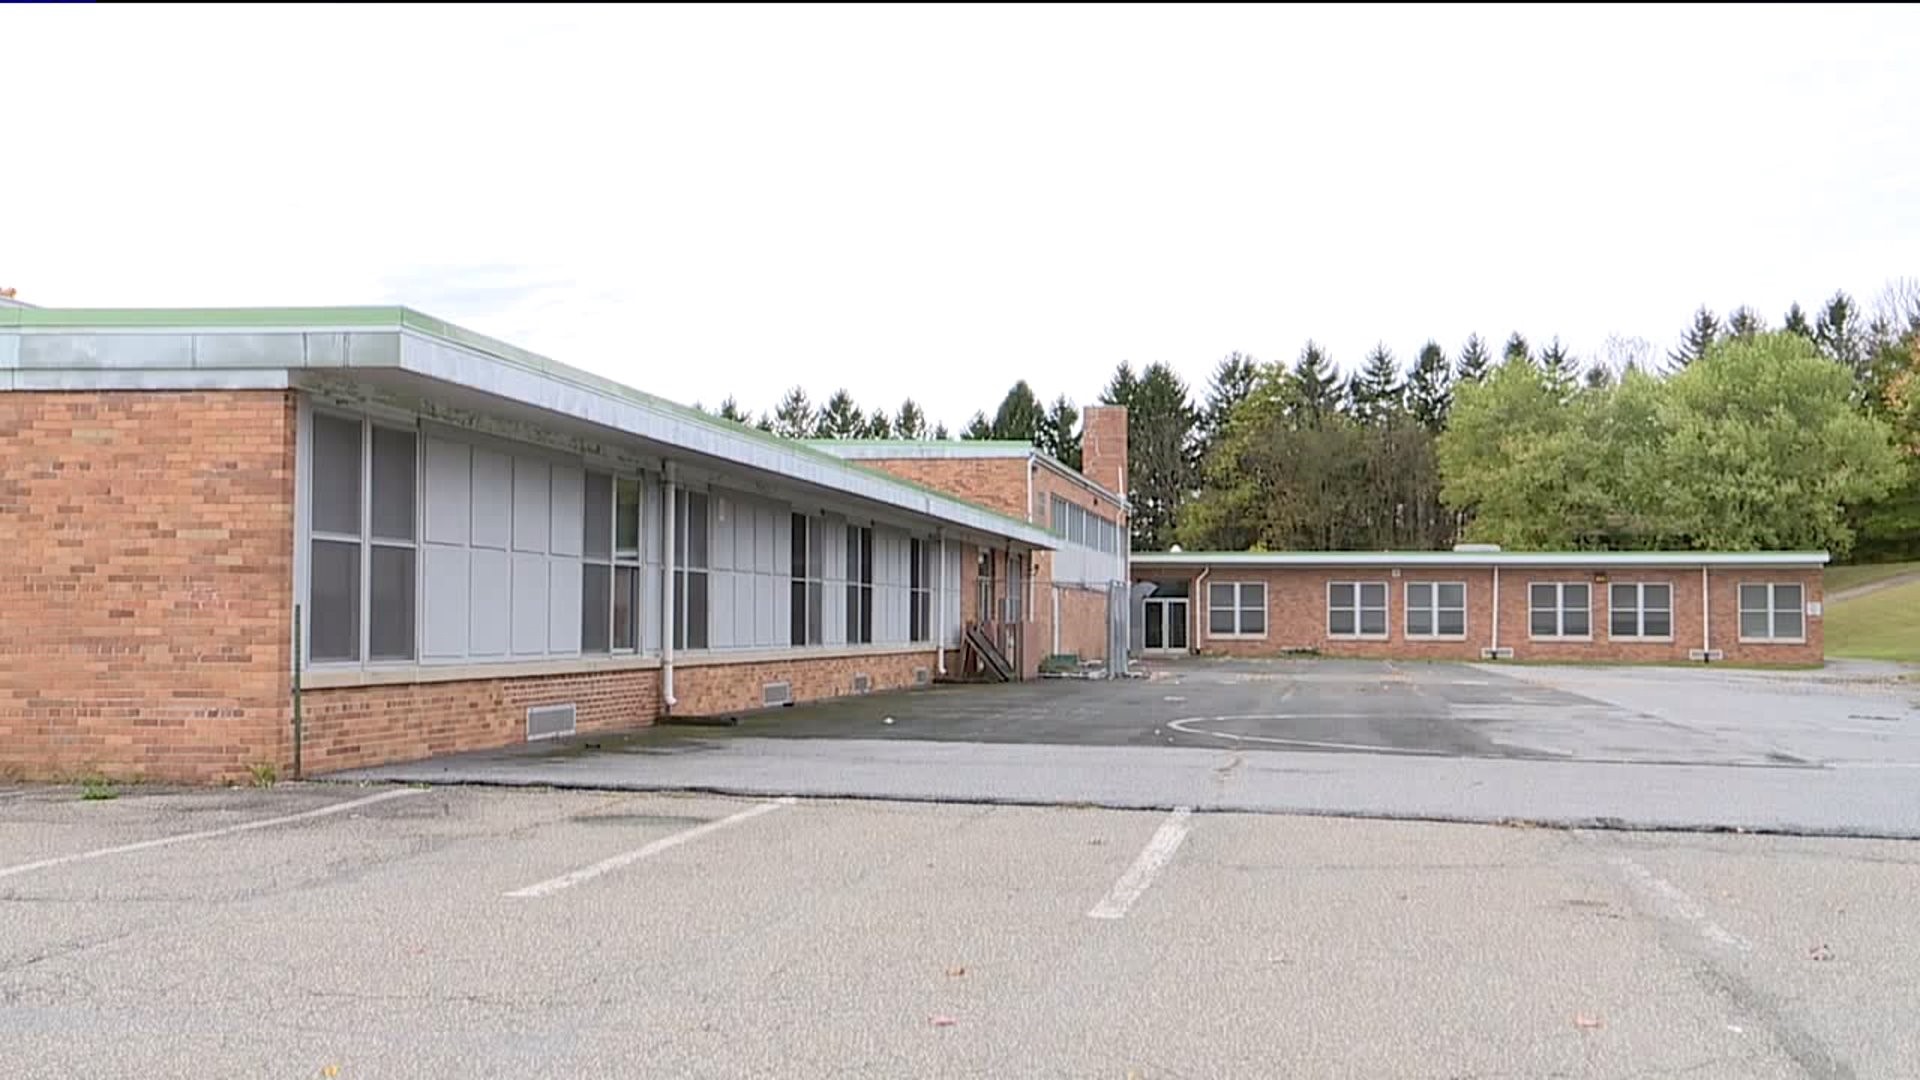 Church to Move into Former Elementary School